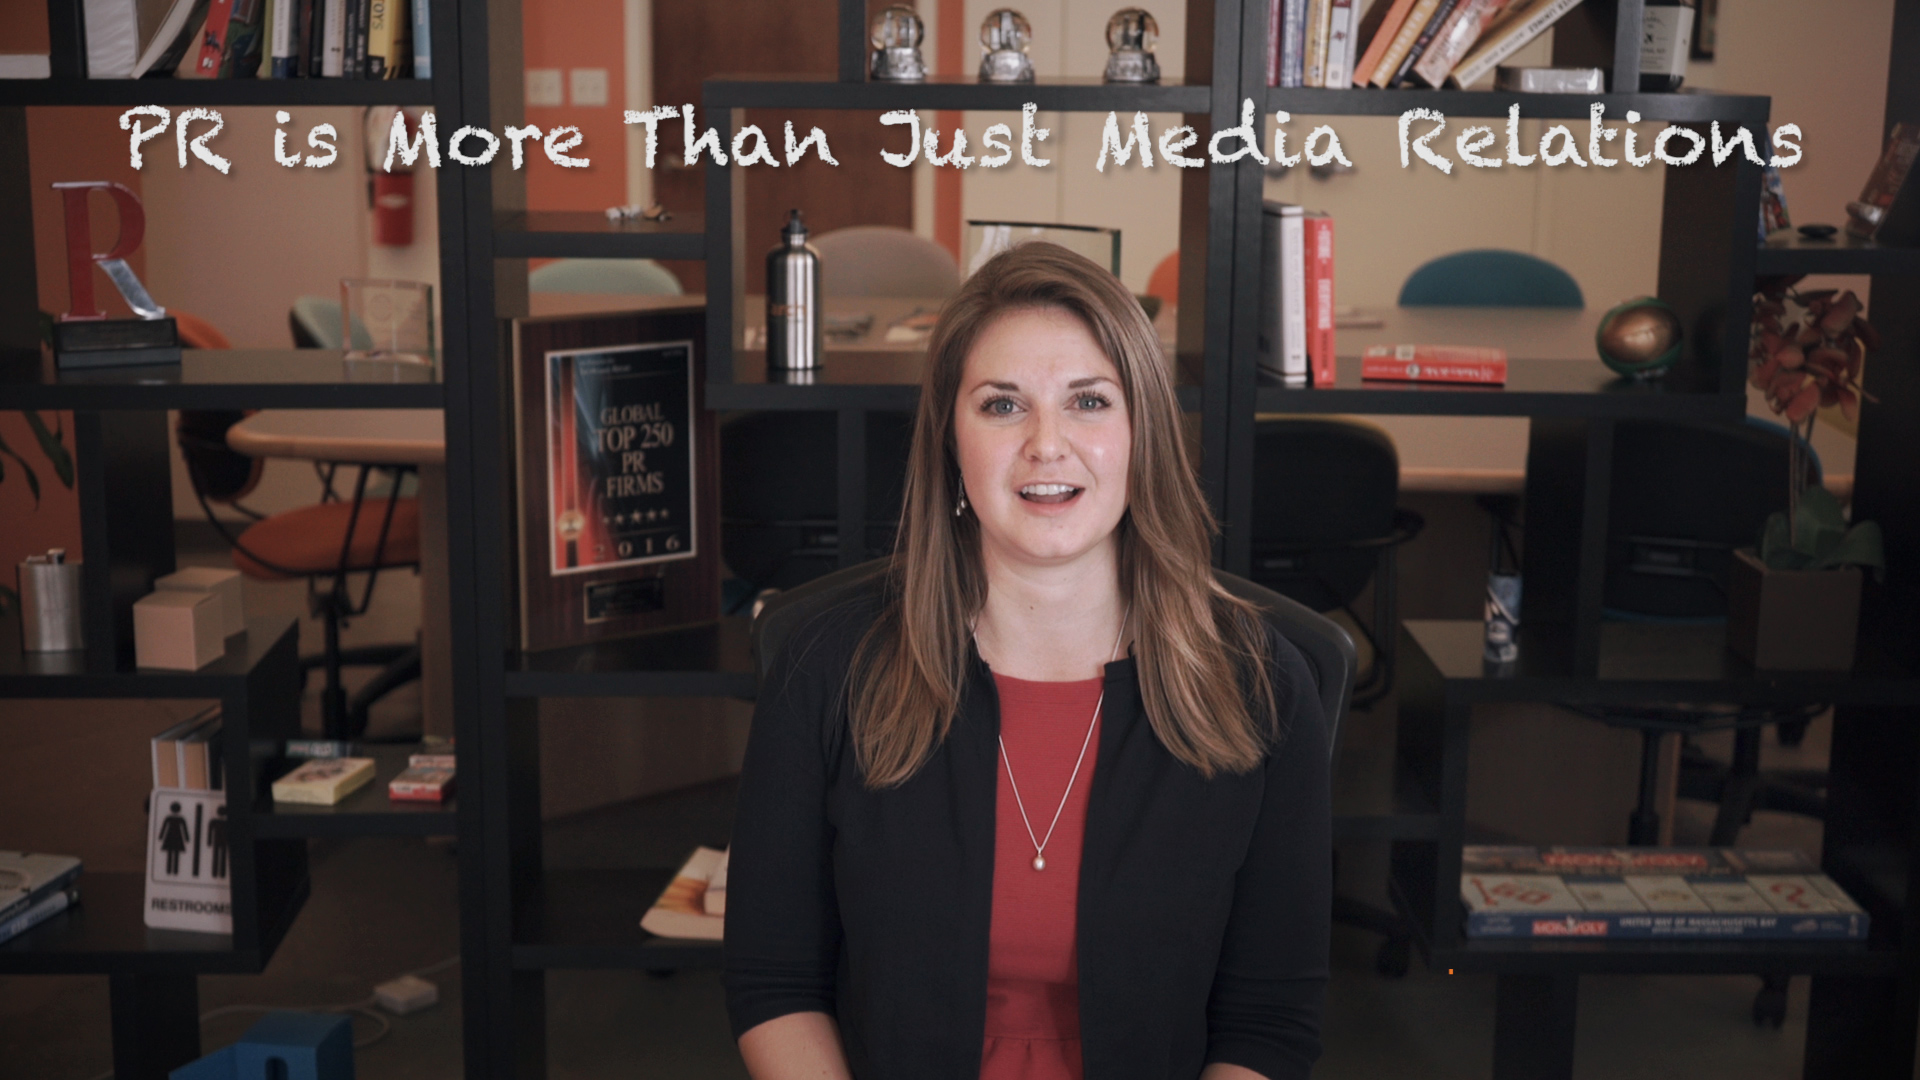 [Video] PR is More Than Just Media Relations